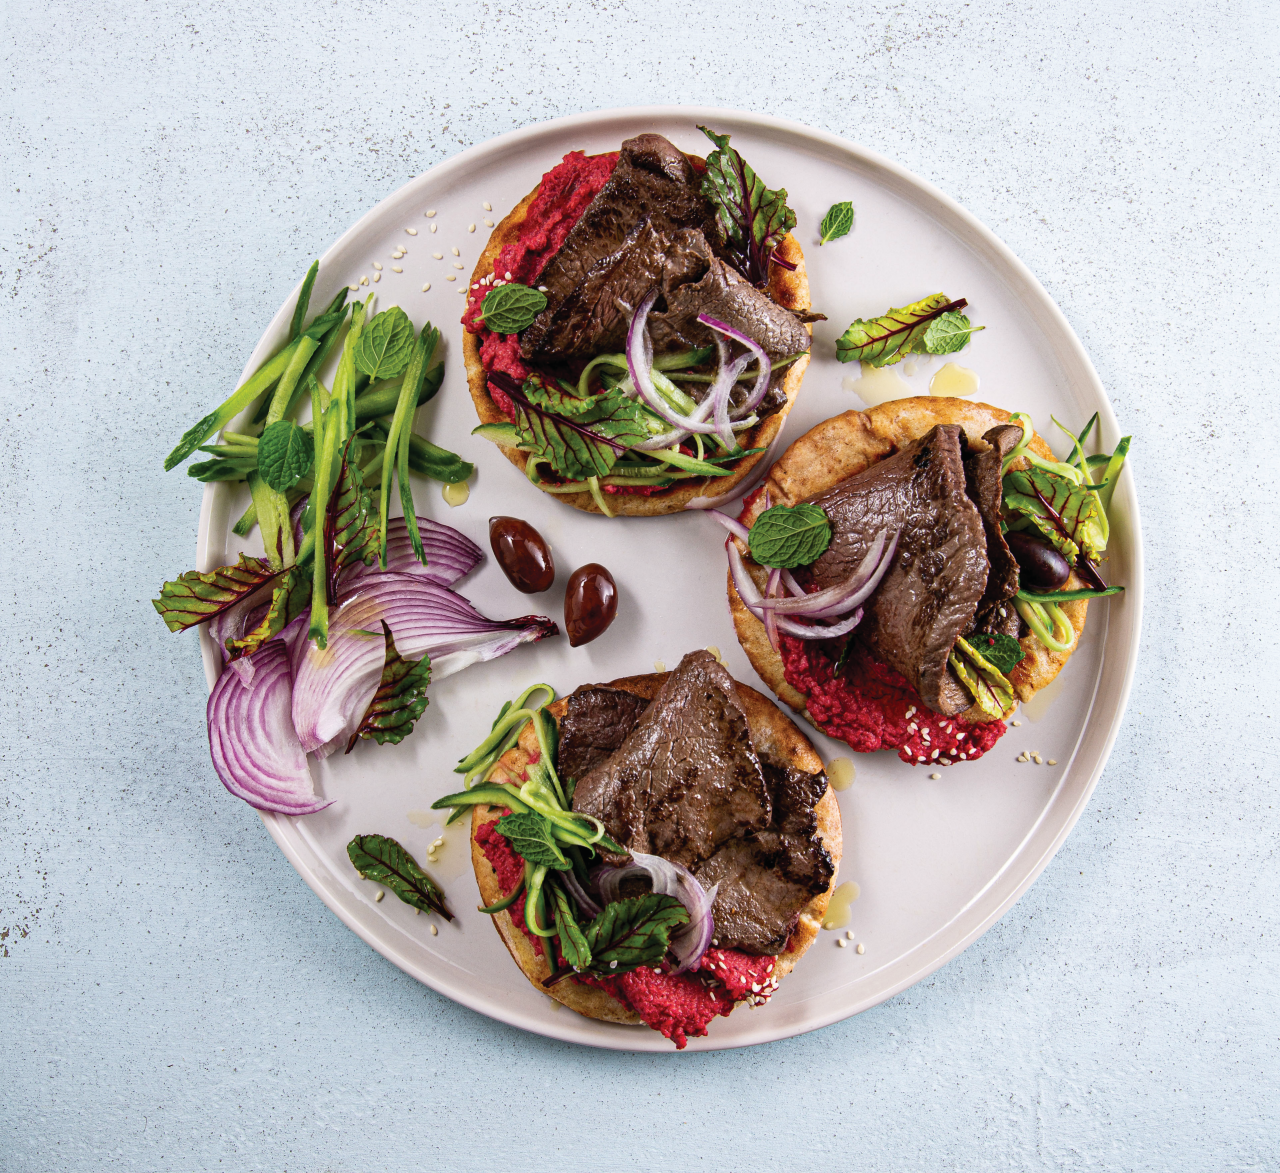 Venison Minute Steaks with Beetroot Hummus on Pita Breads on a cream plate